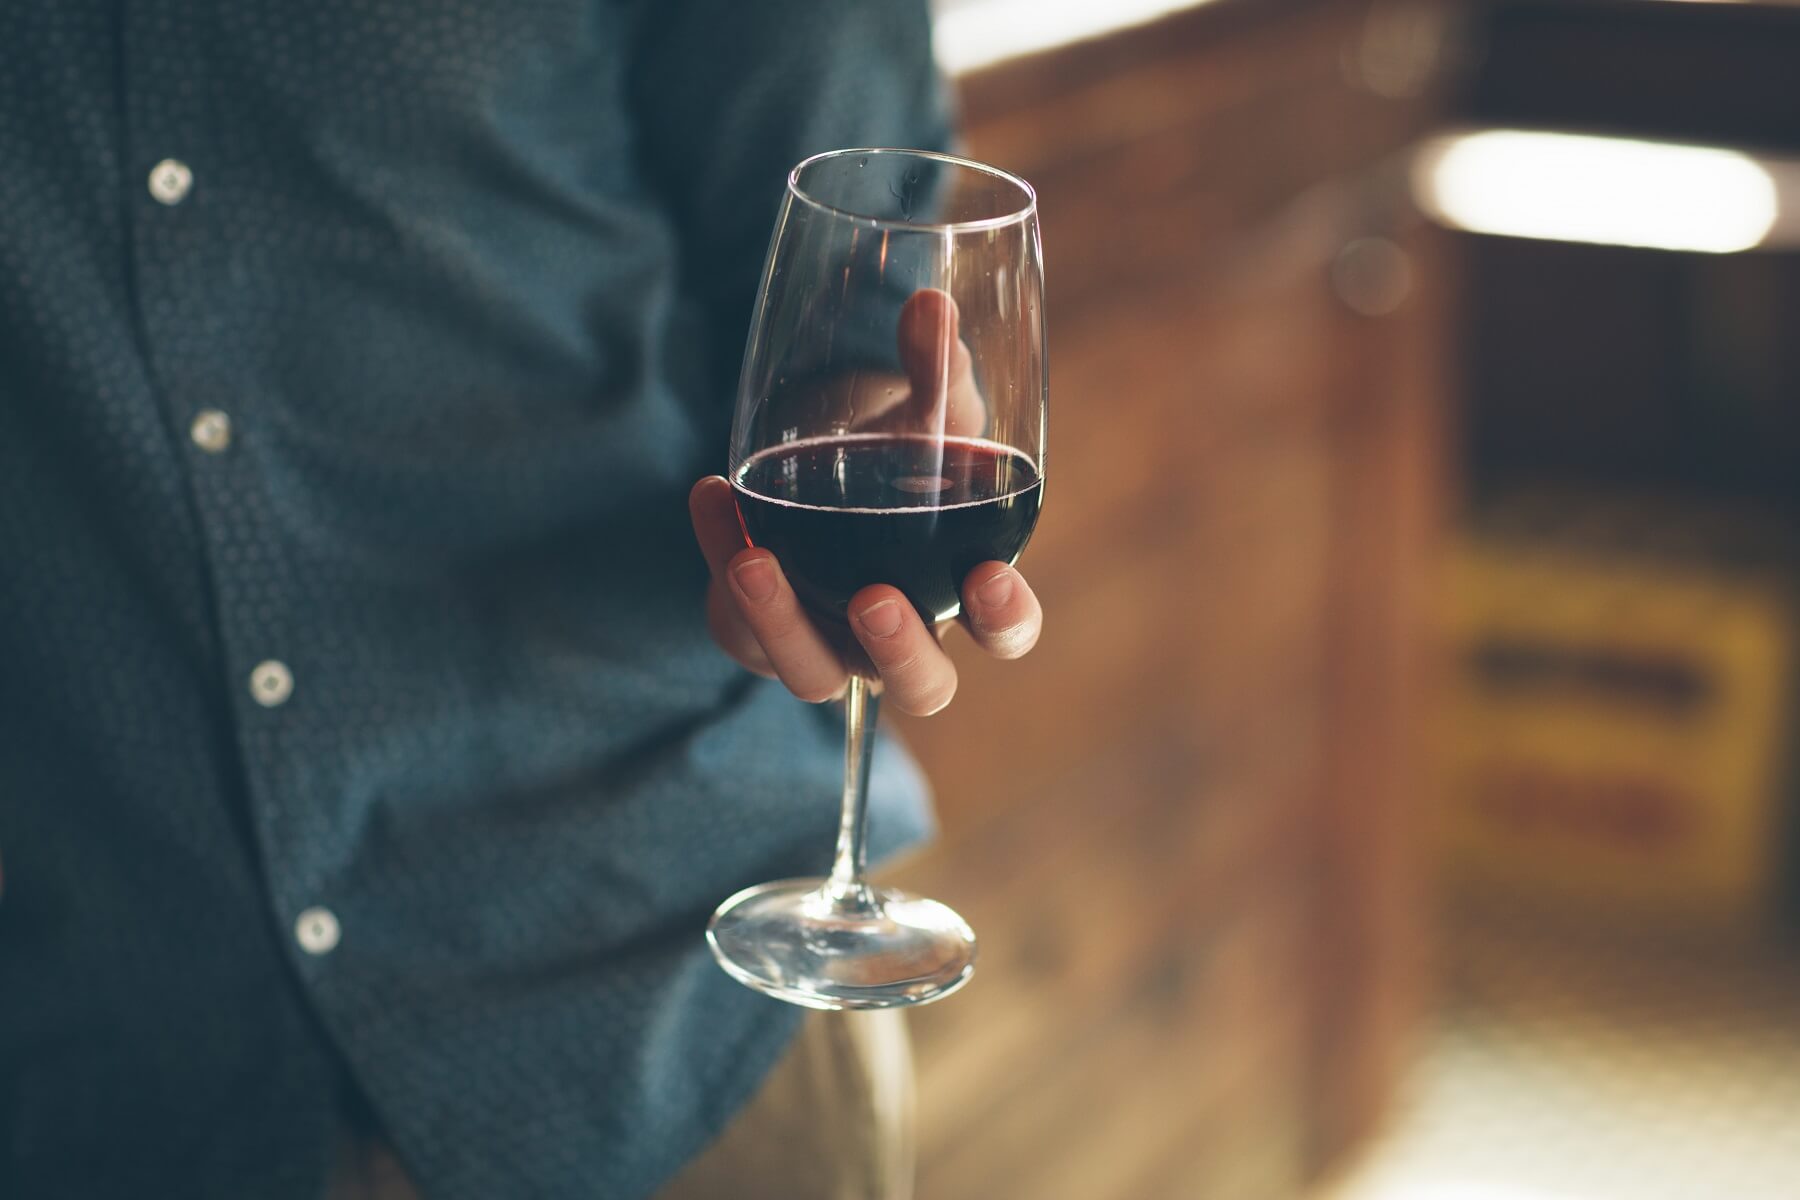 Three Things the Wine Industry Would Rather You Didn’t Know